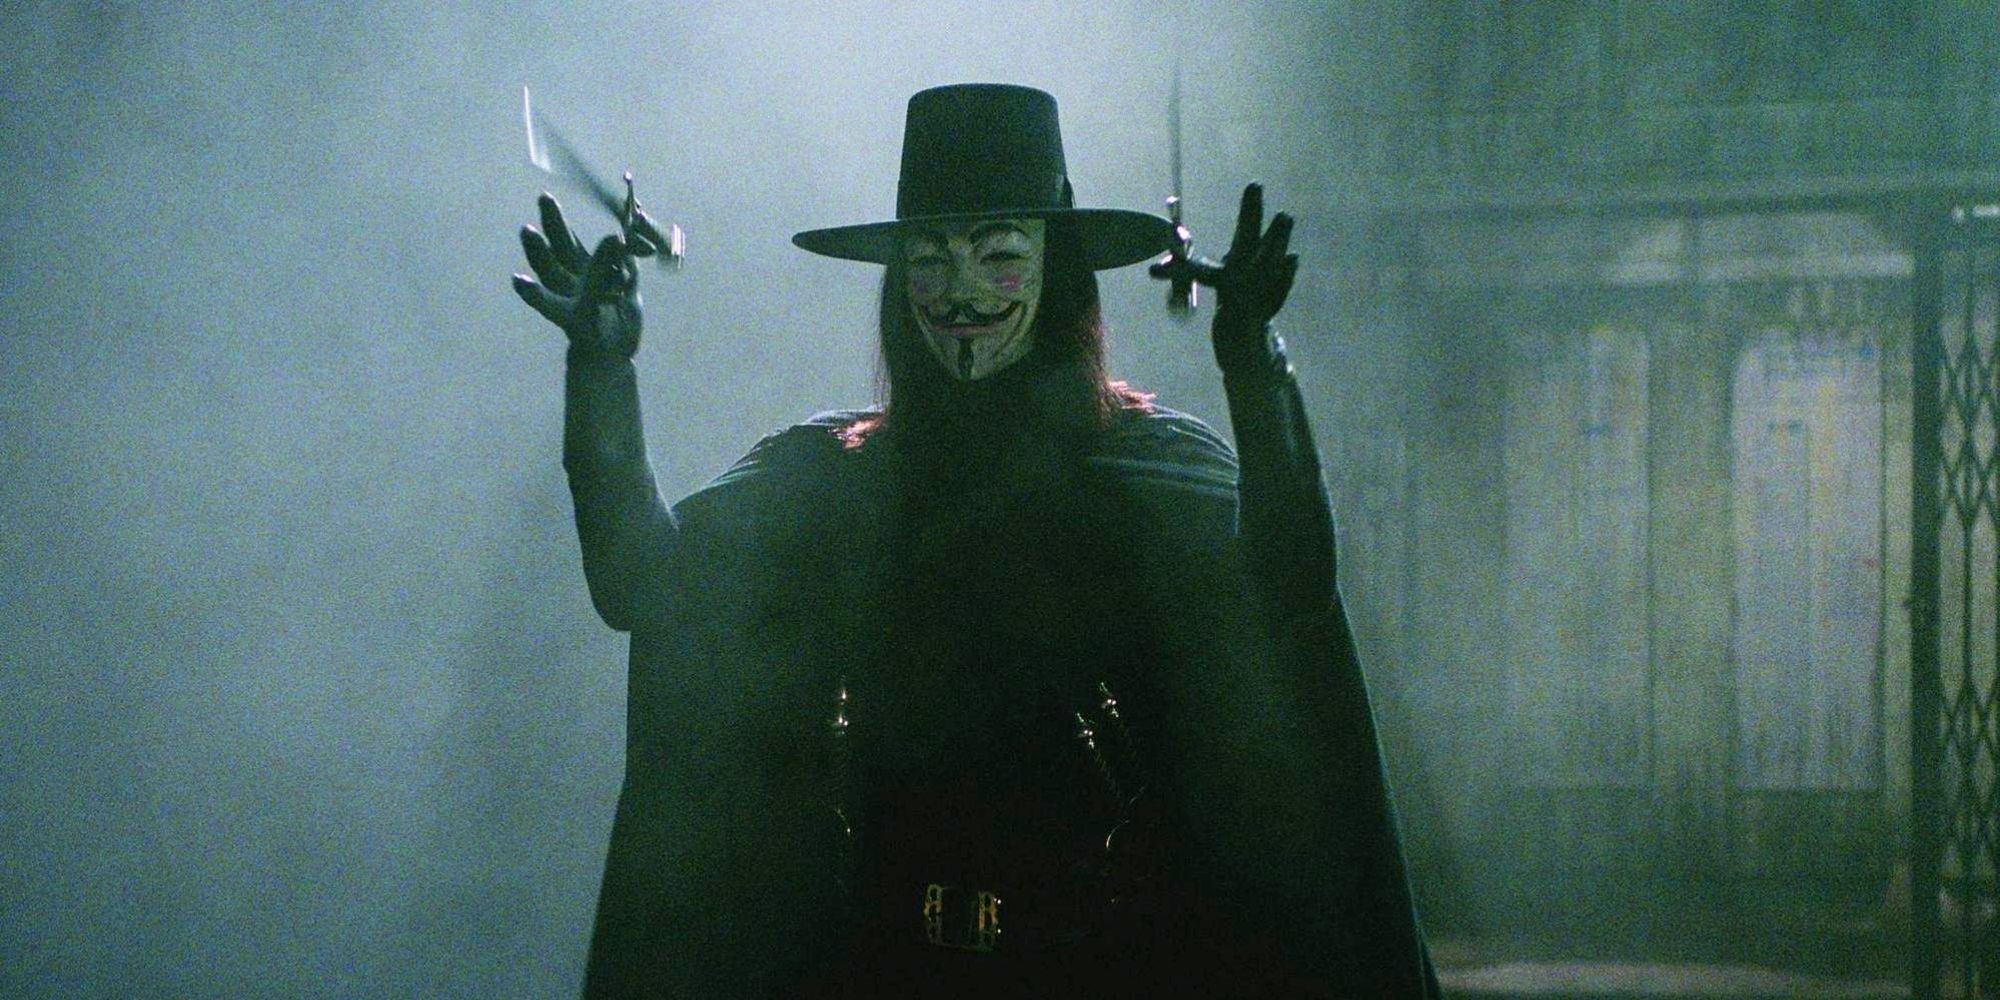 Official image of the movie V for Vendetta (2005).